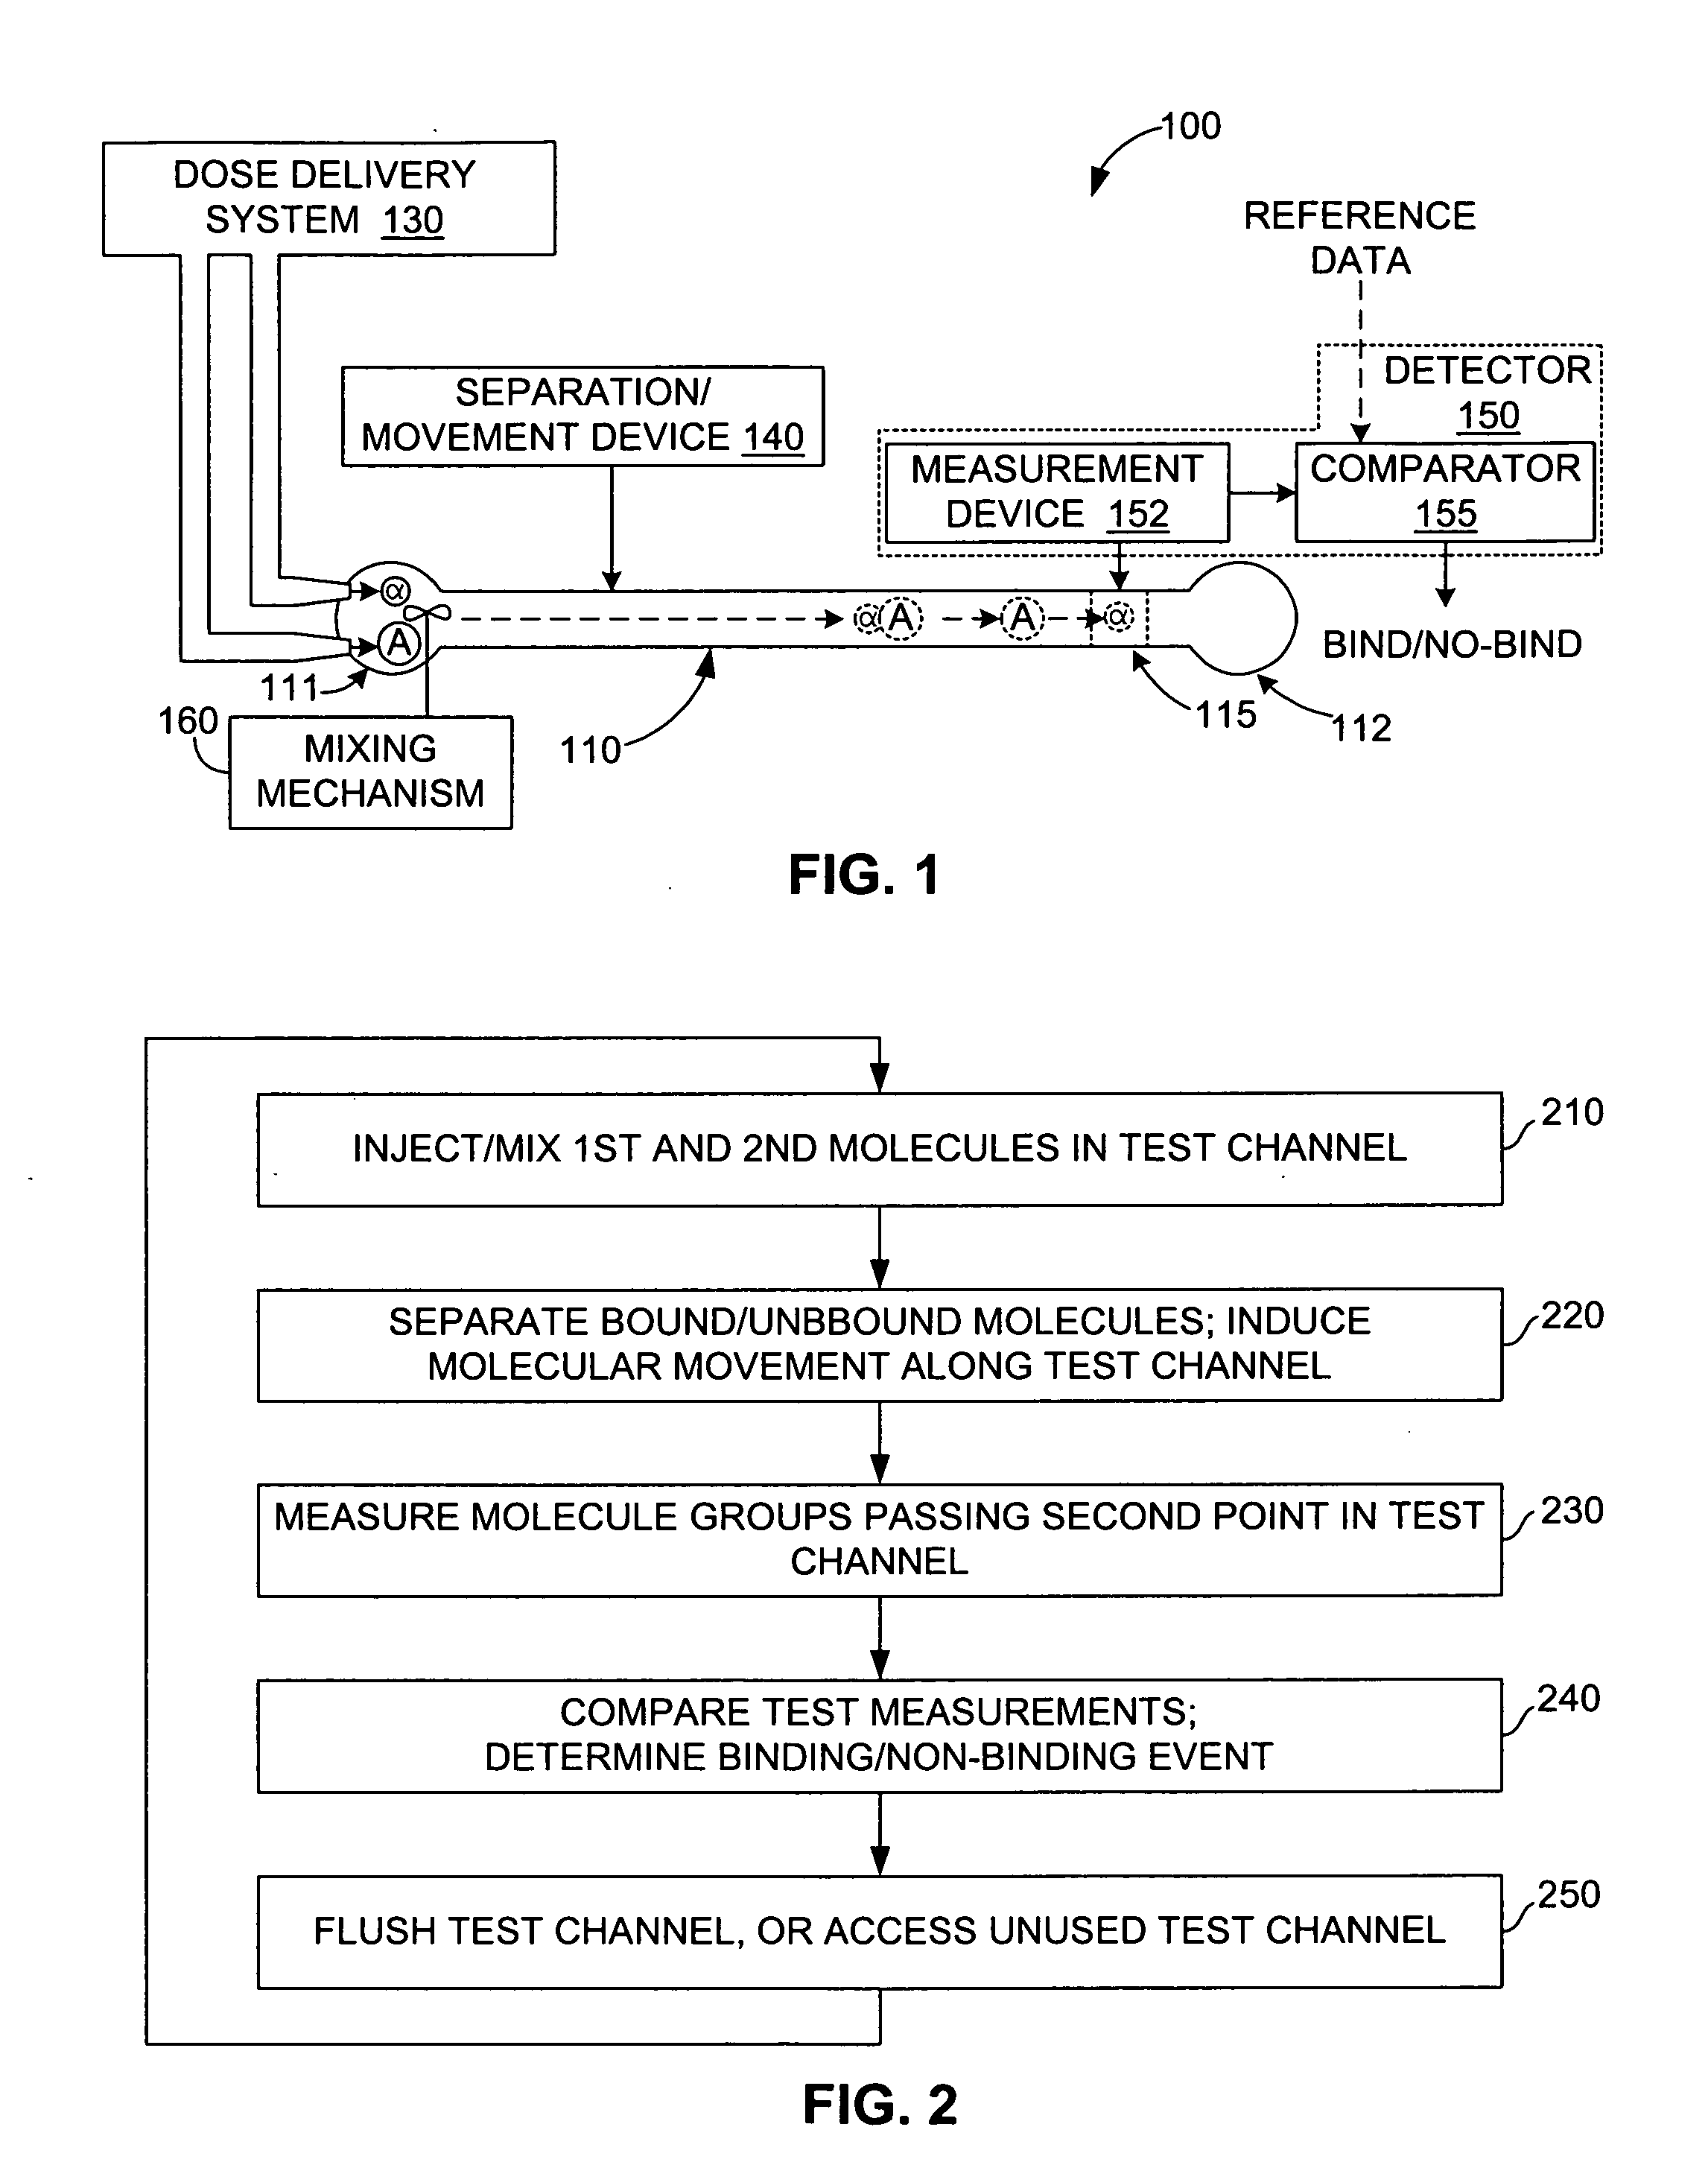 Molecular binding event detection using separation channels